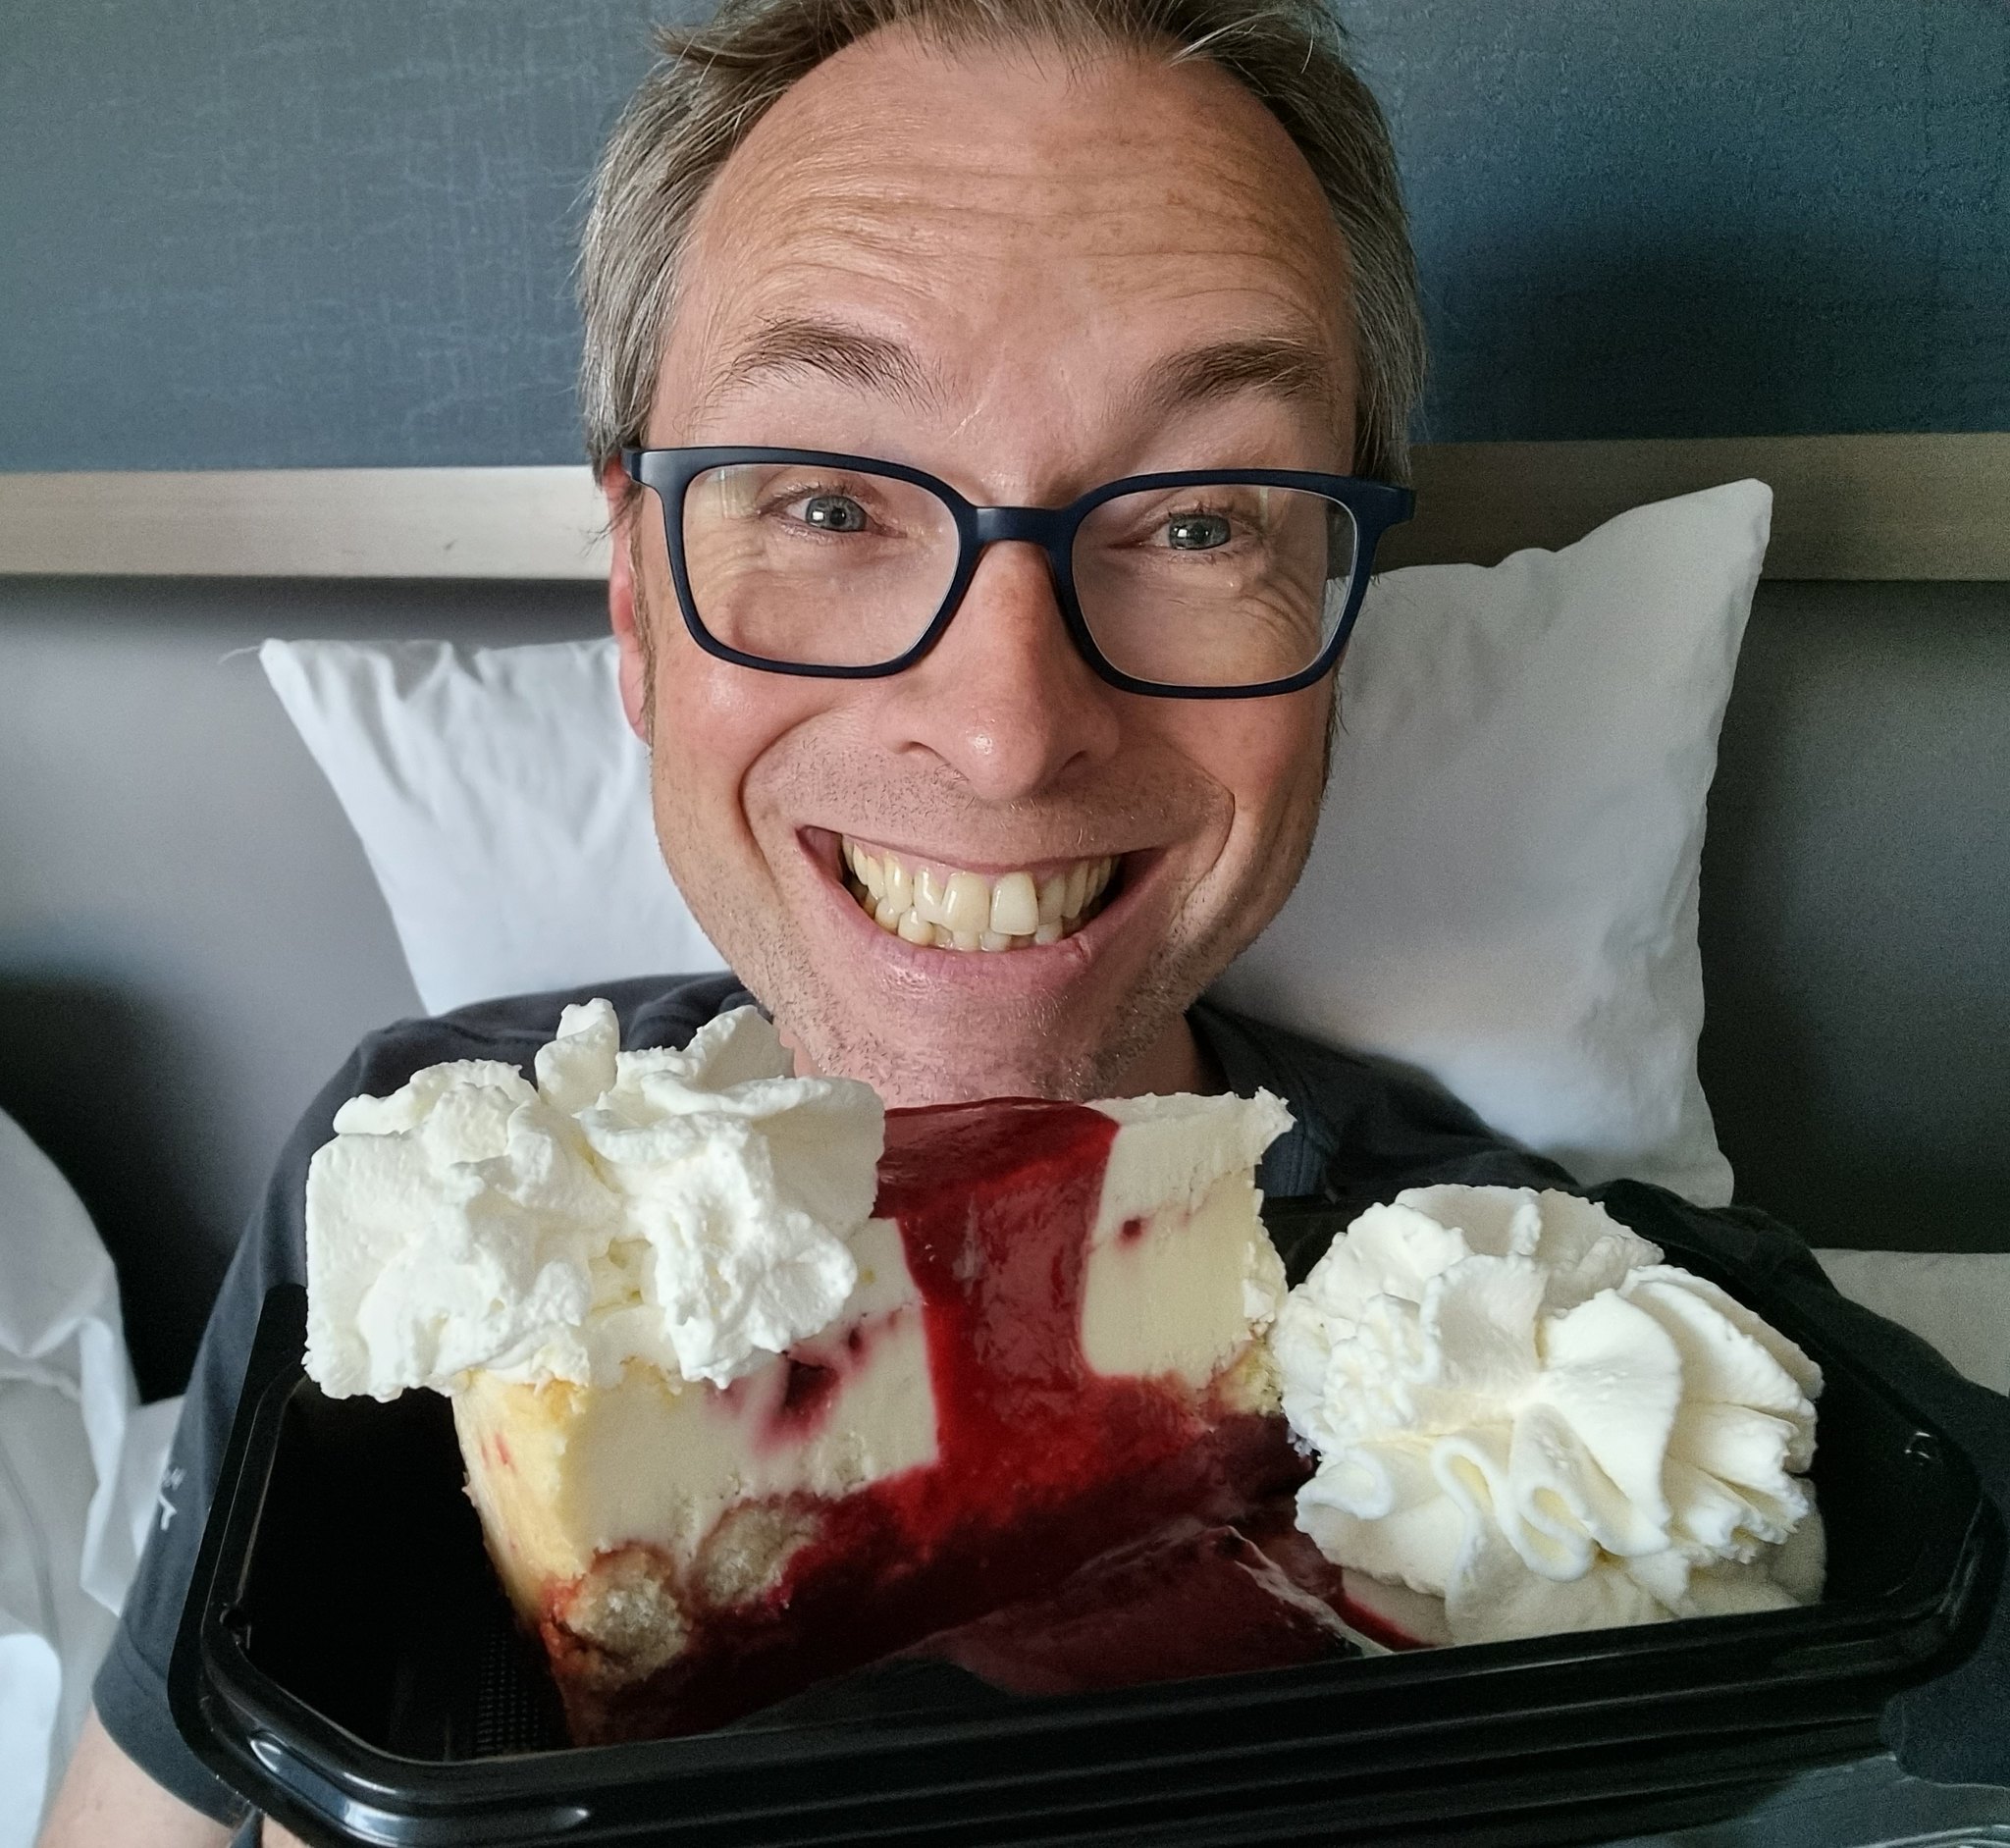 Theres something very special about eating cheesecake in bed!